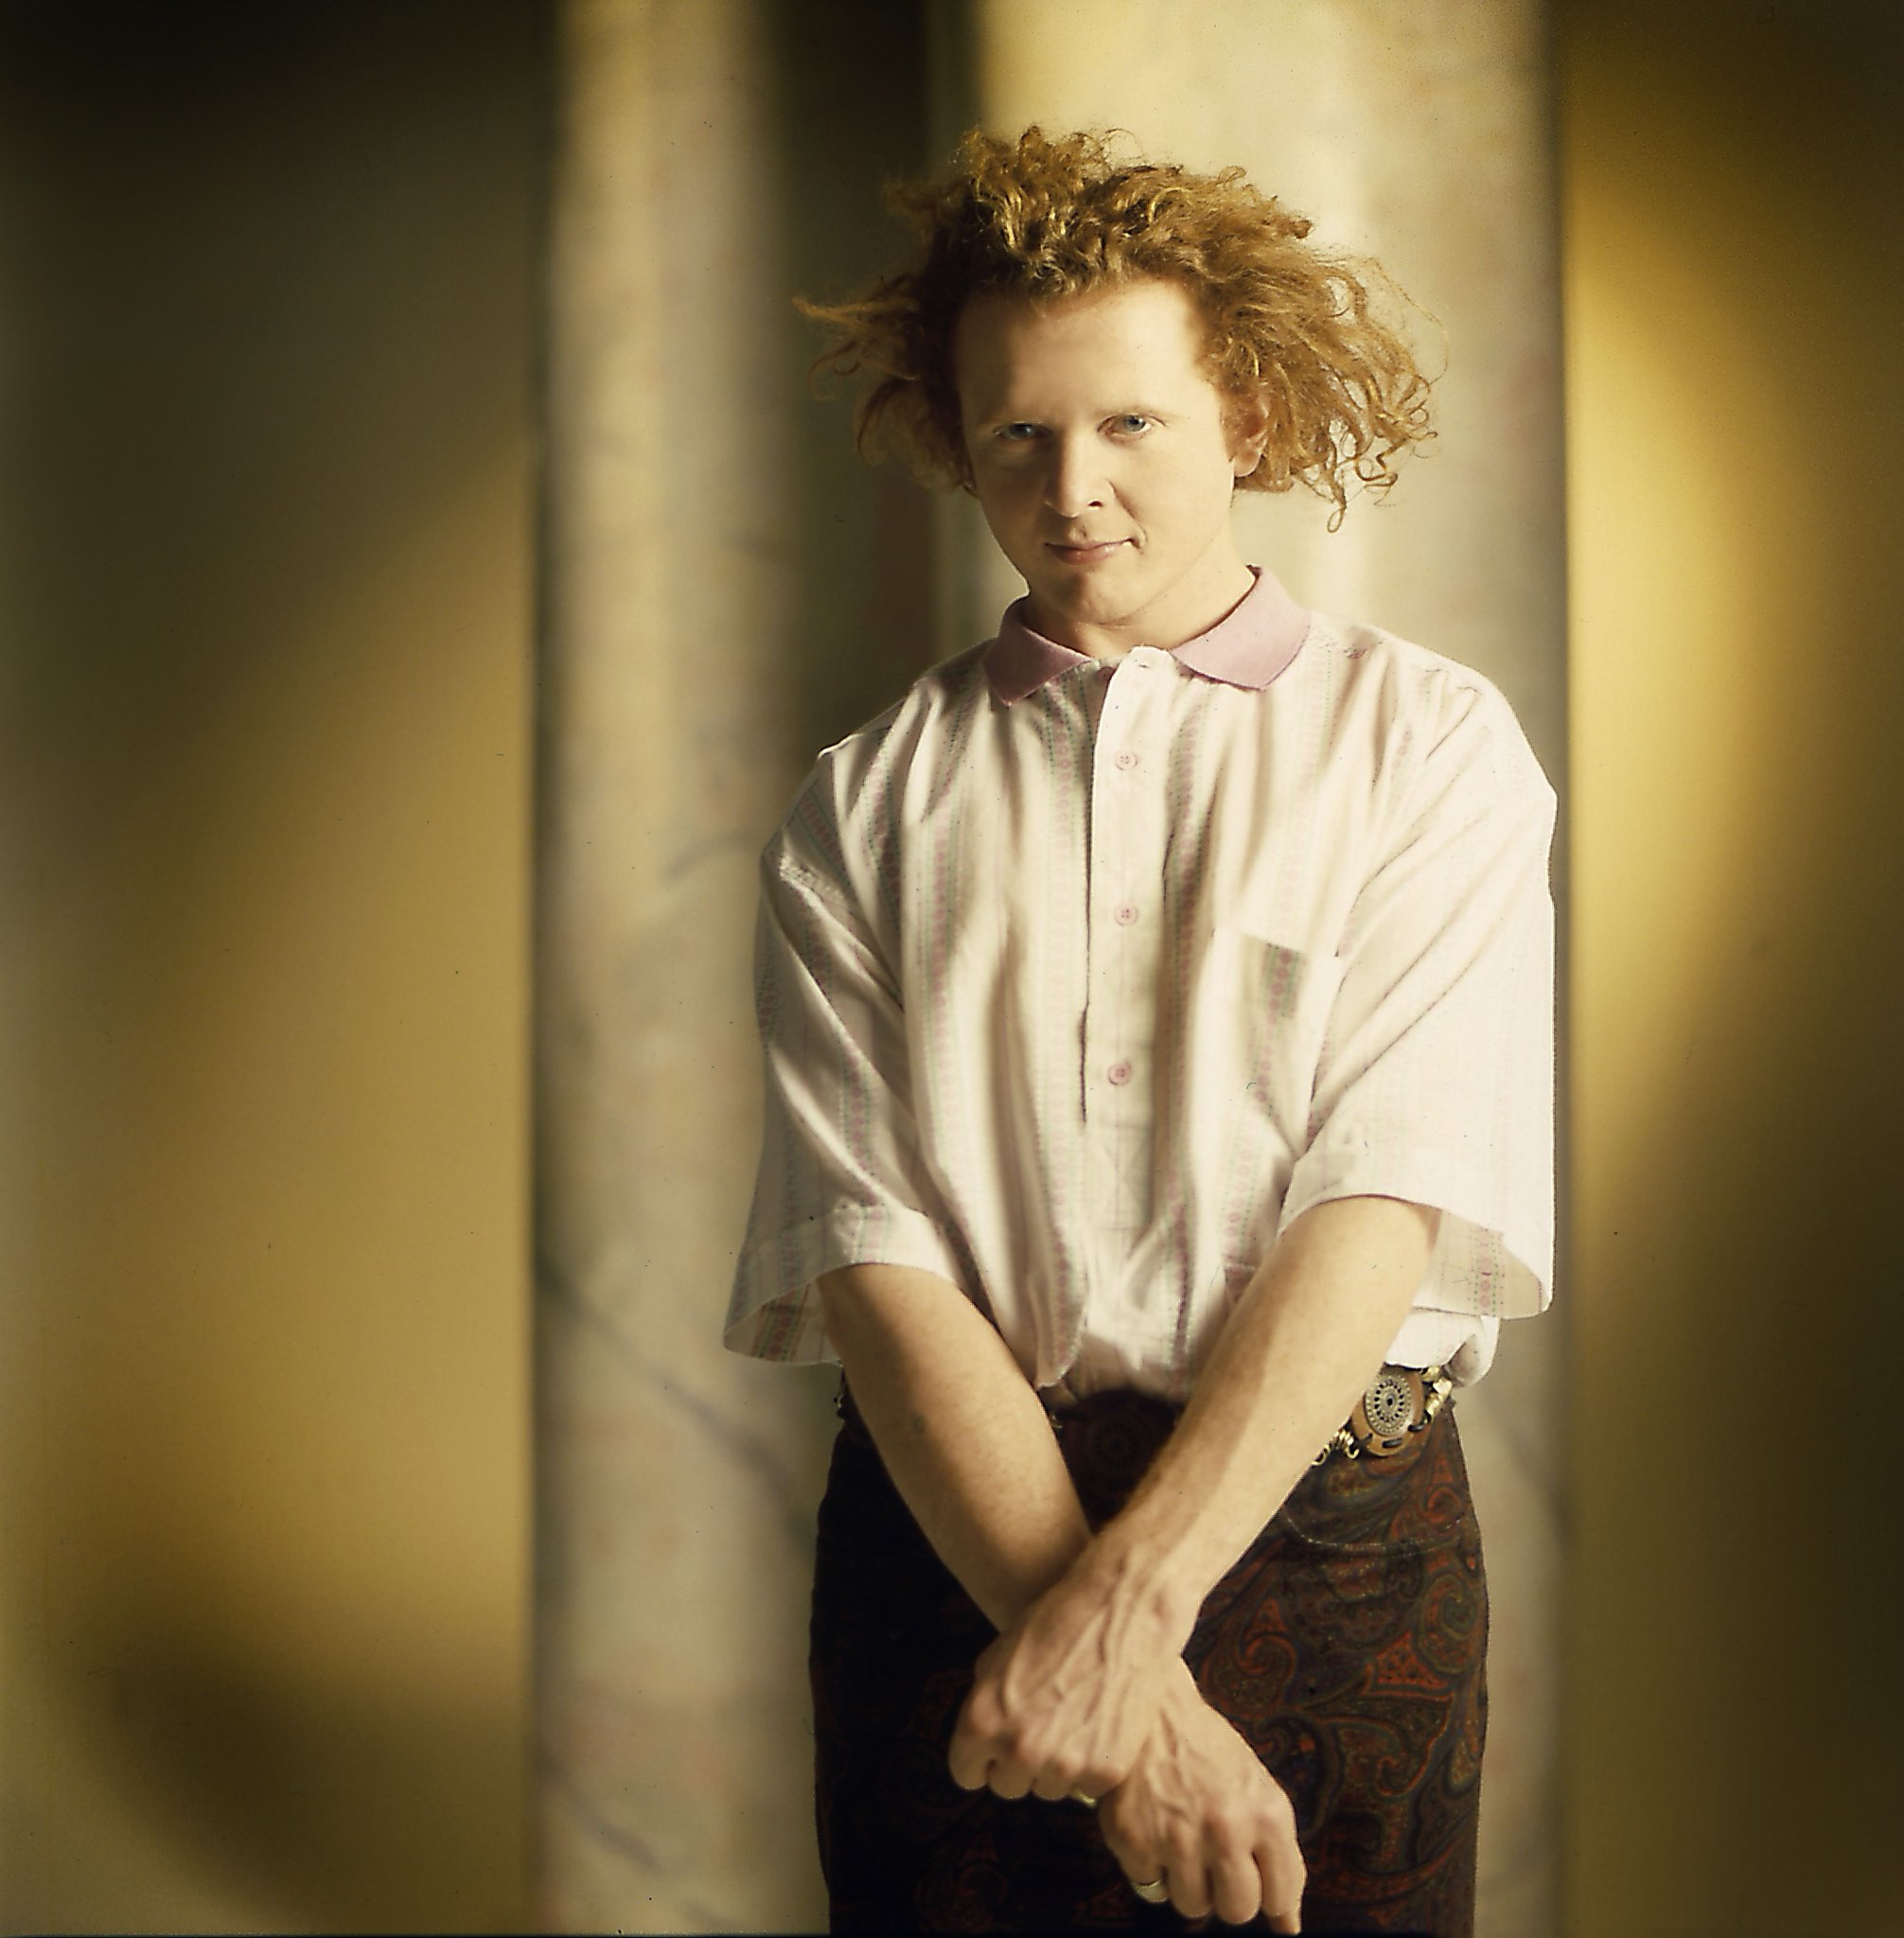 Wishing frontman Mick Hucknall a happy 59th birthday. Favourite Simply Red song? 